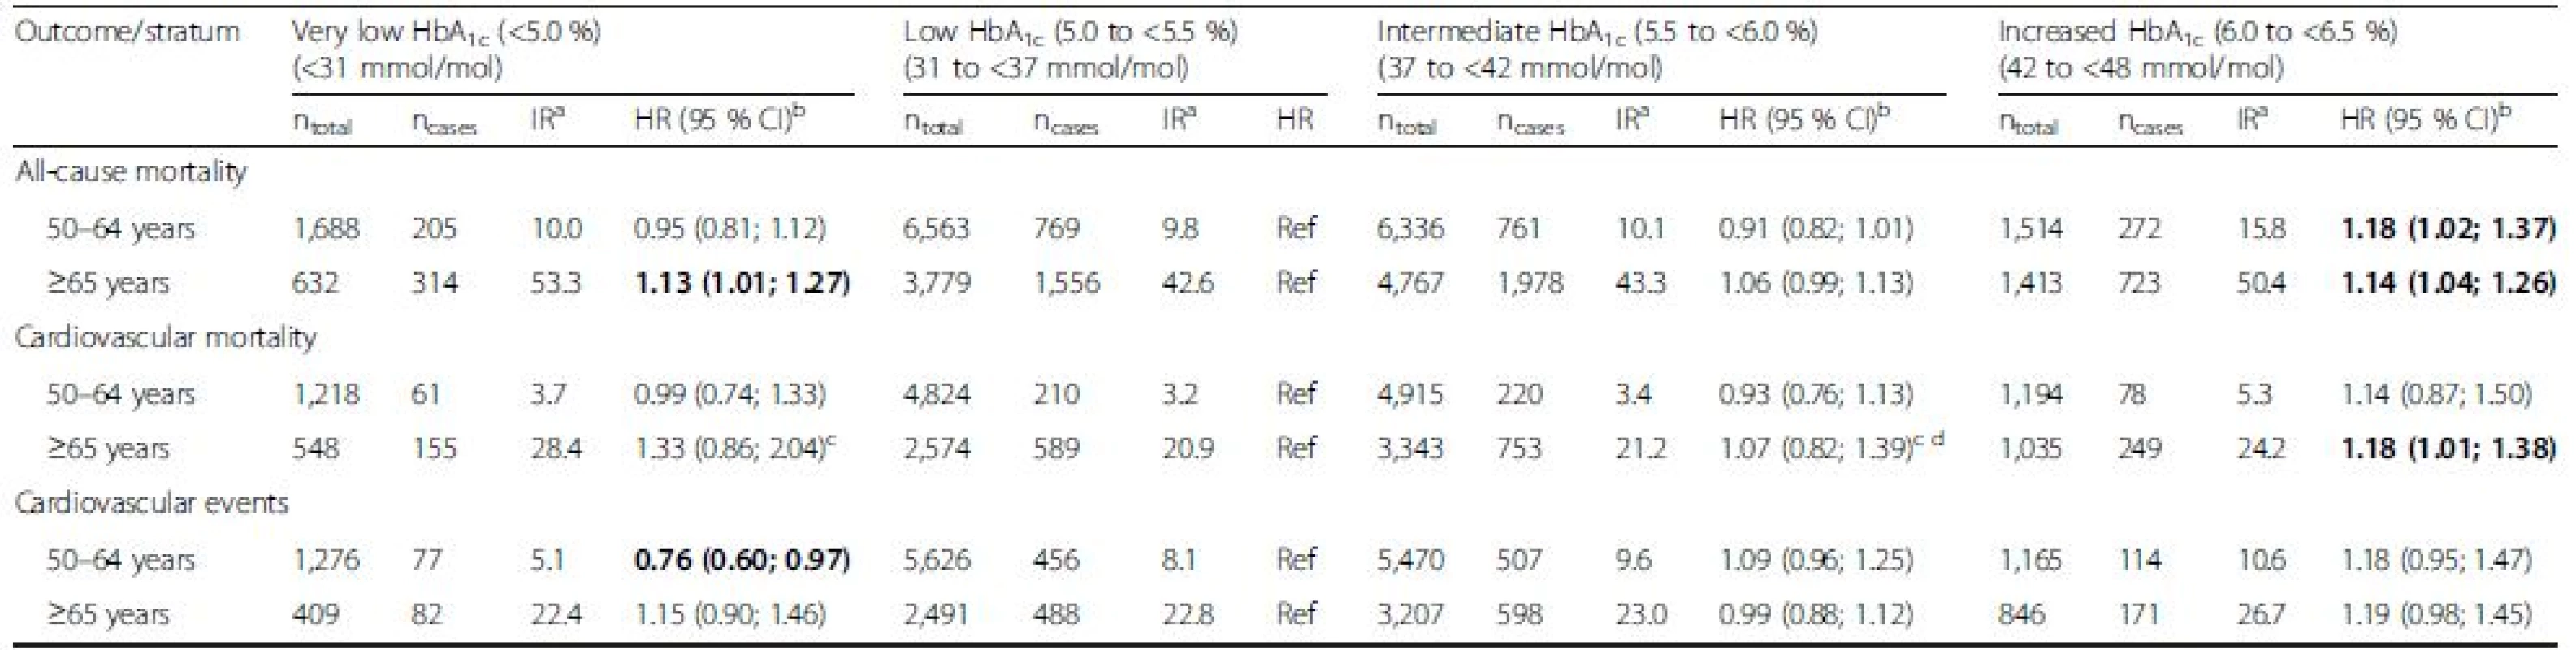 Age-stratified analyses of the associations of HbA<sub>1c</sub> levels with mortality and cardiovascular outcomes in subjects without diabetes mellitus